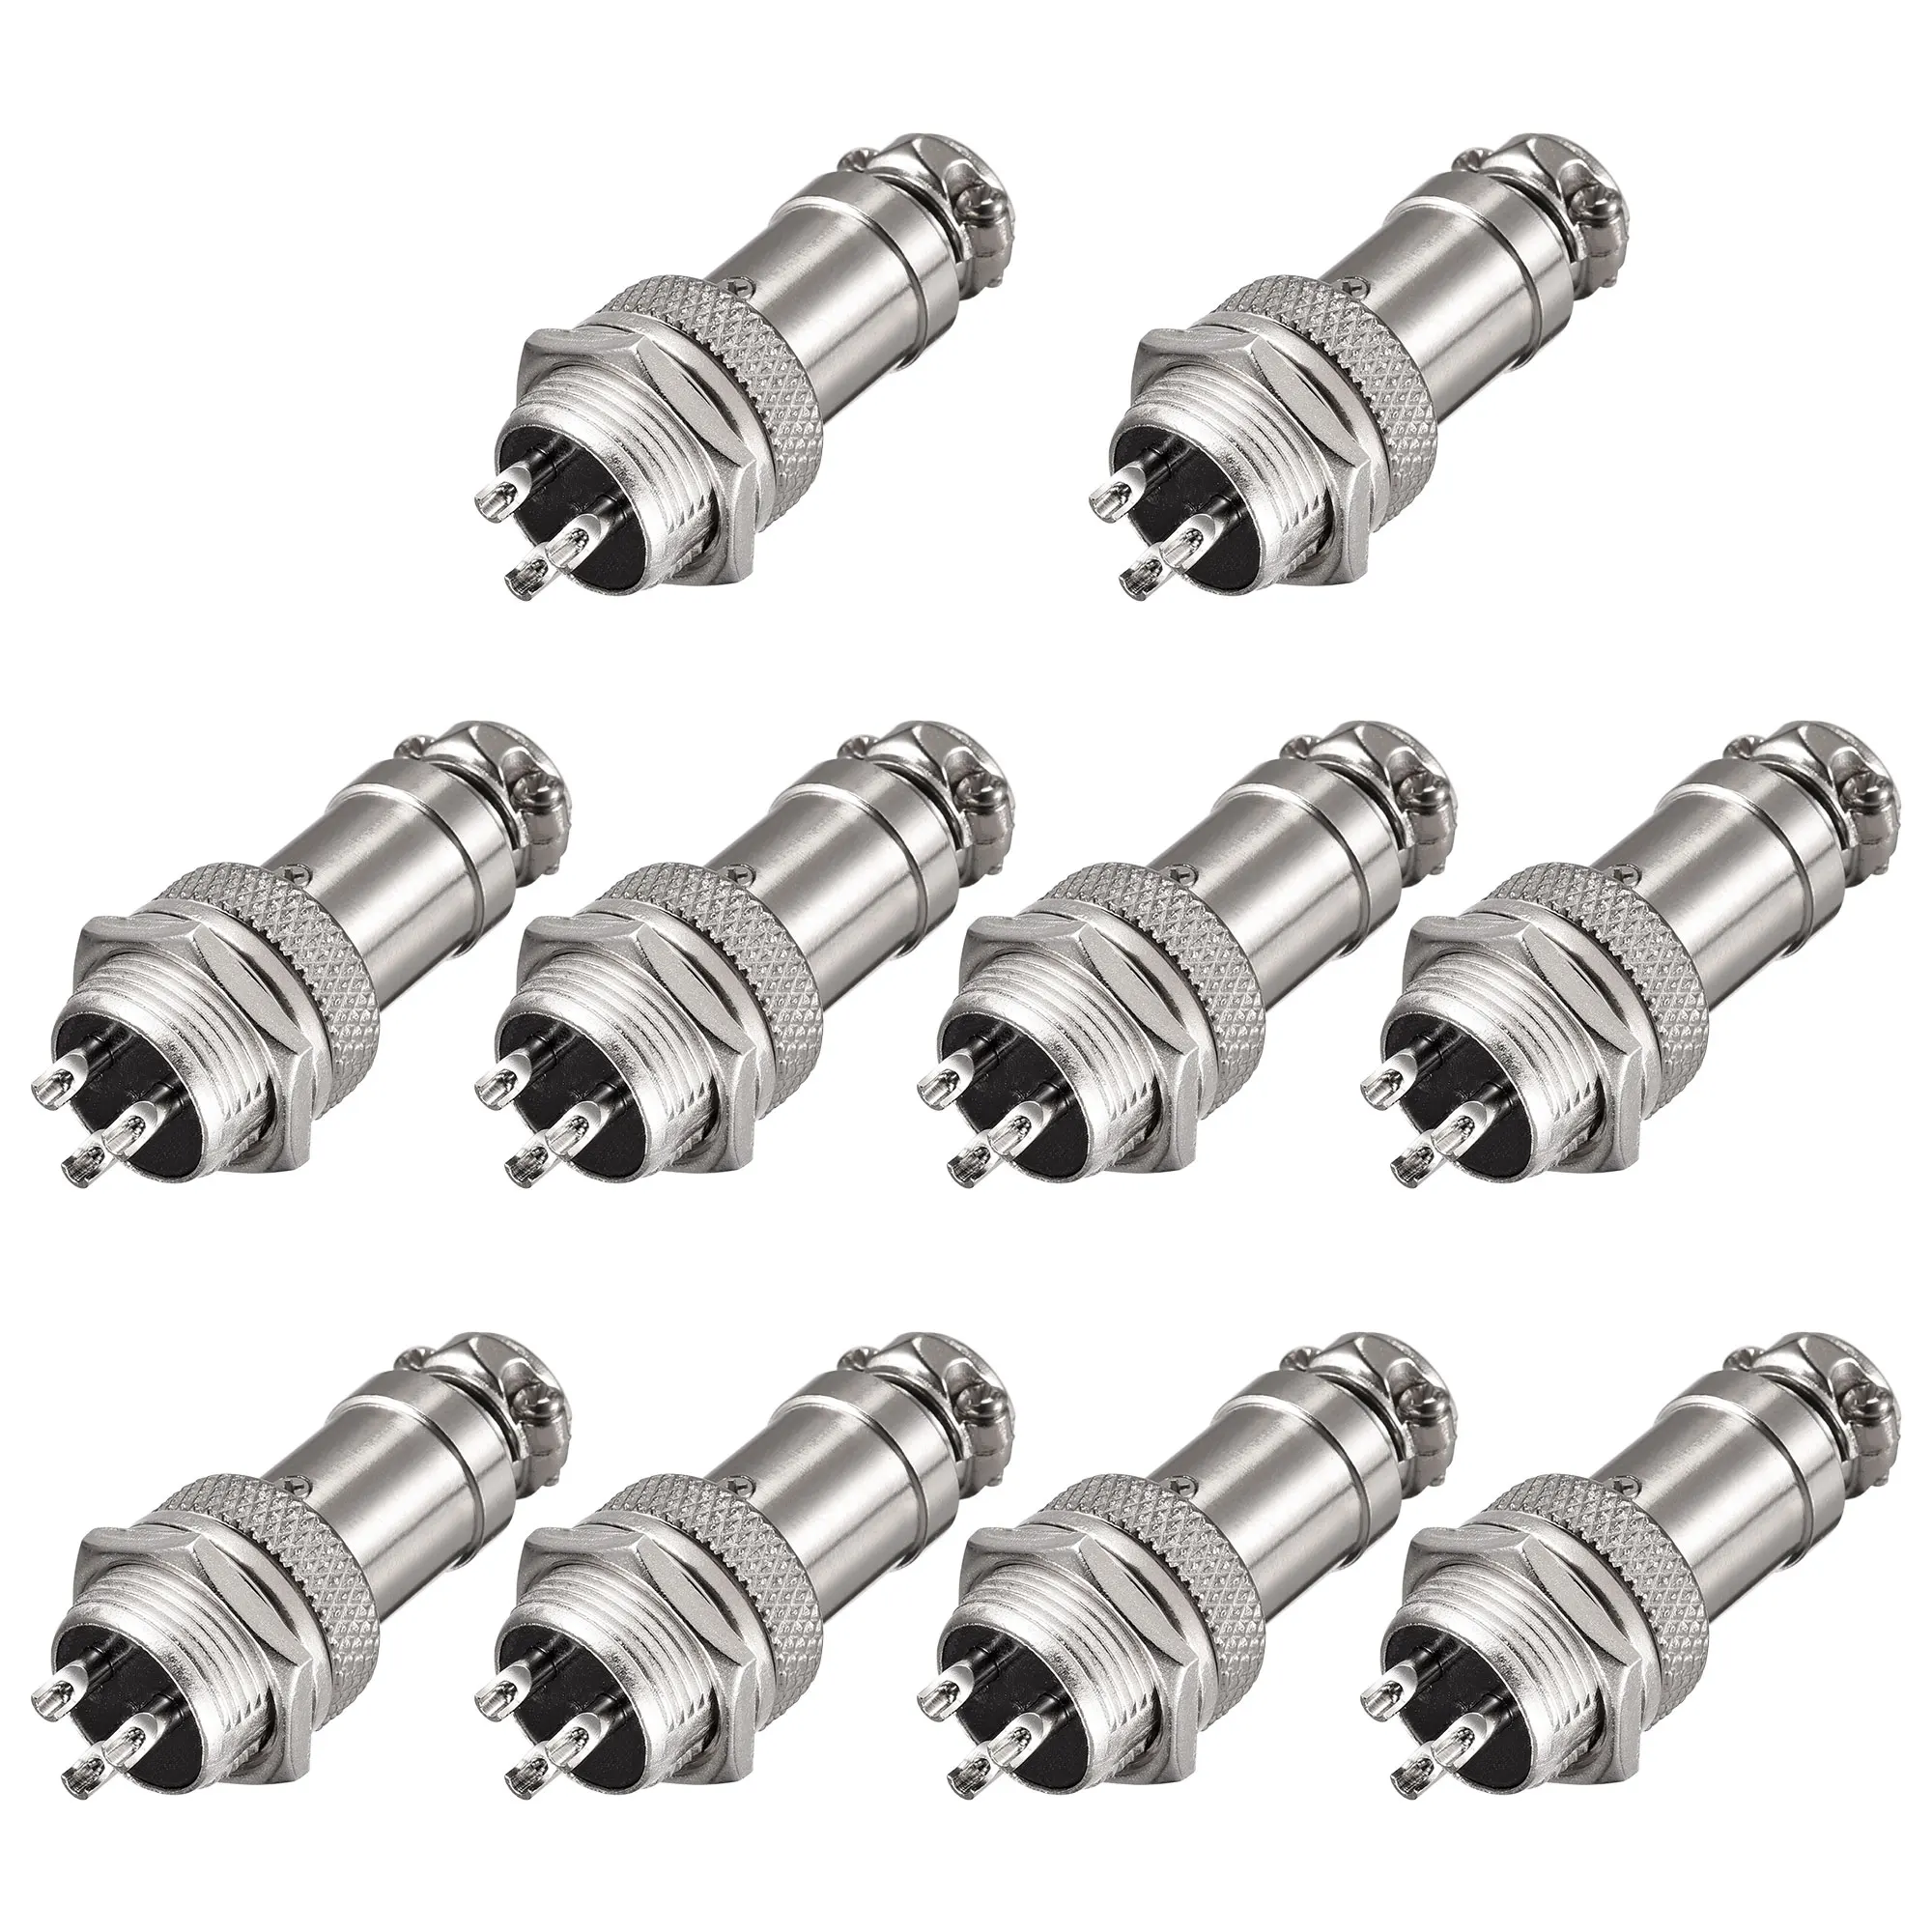 

Uxcell Aviation Connector 16mm 3 Terminals 7A 400V GX16 Waterproof Male Female 10 Pairs